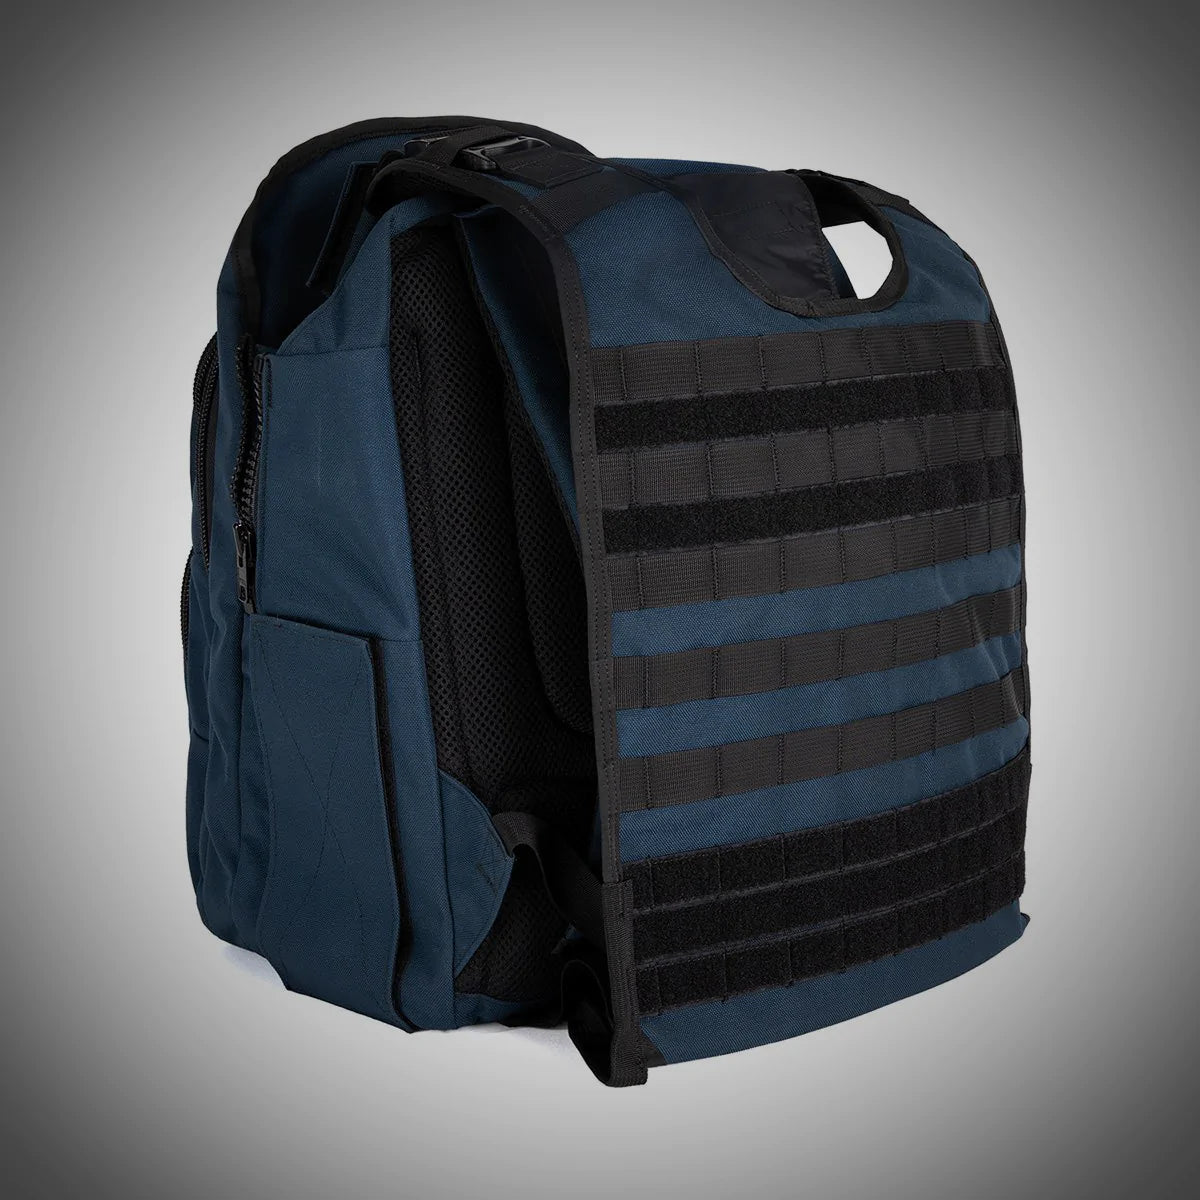 Gray Man Ballistipac Bullet Proof Tactical Backpacks (Backpack Only, Body Armor Sold Separately)